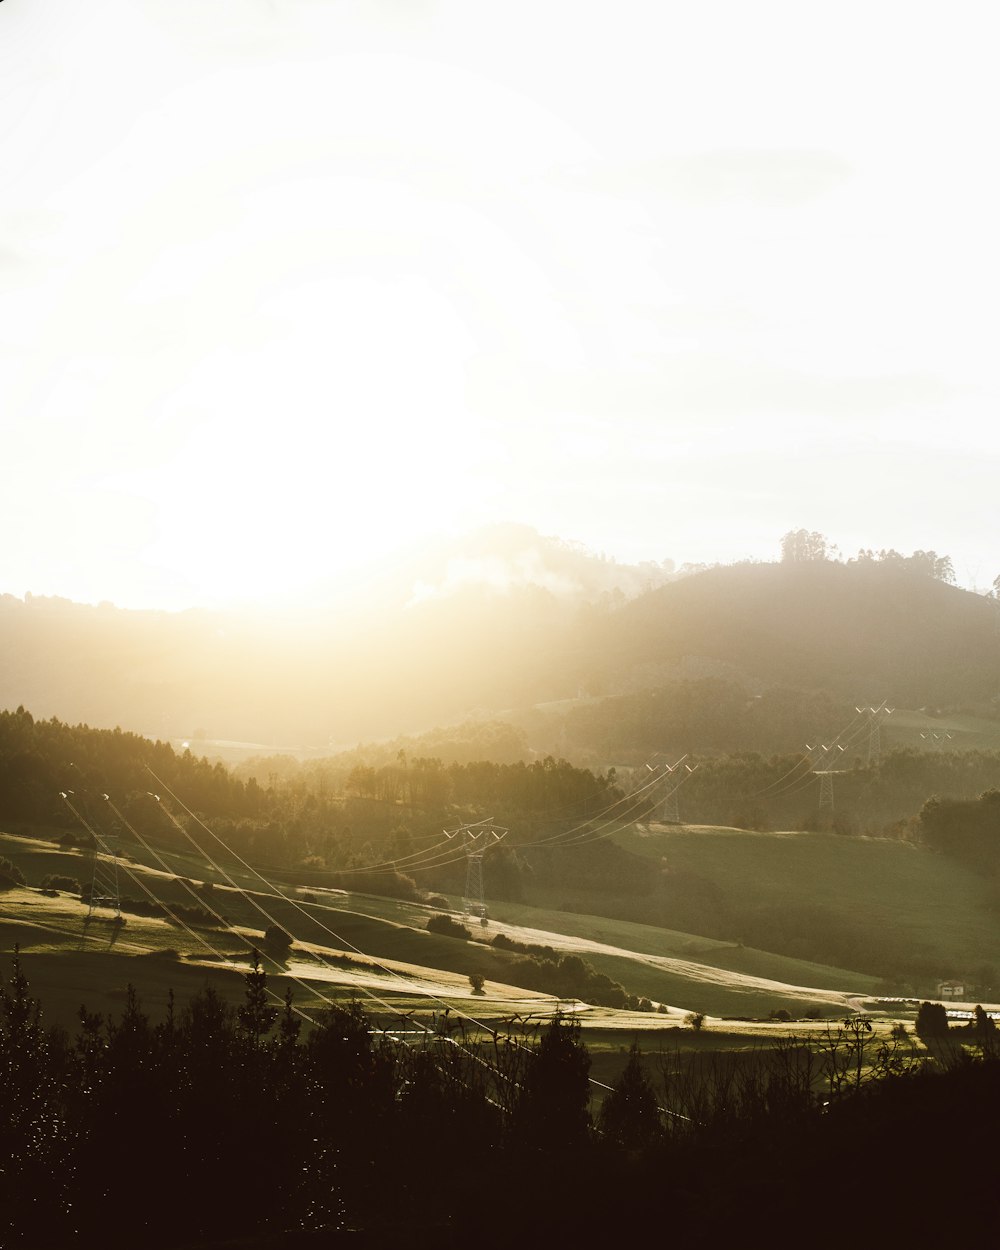 the sun shines brightly over the rolling hills